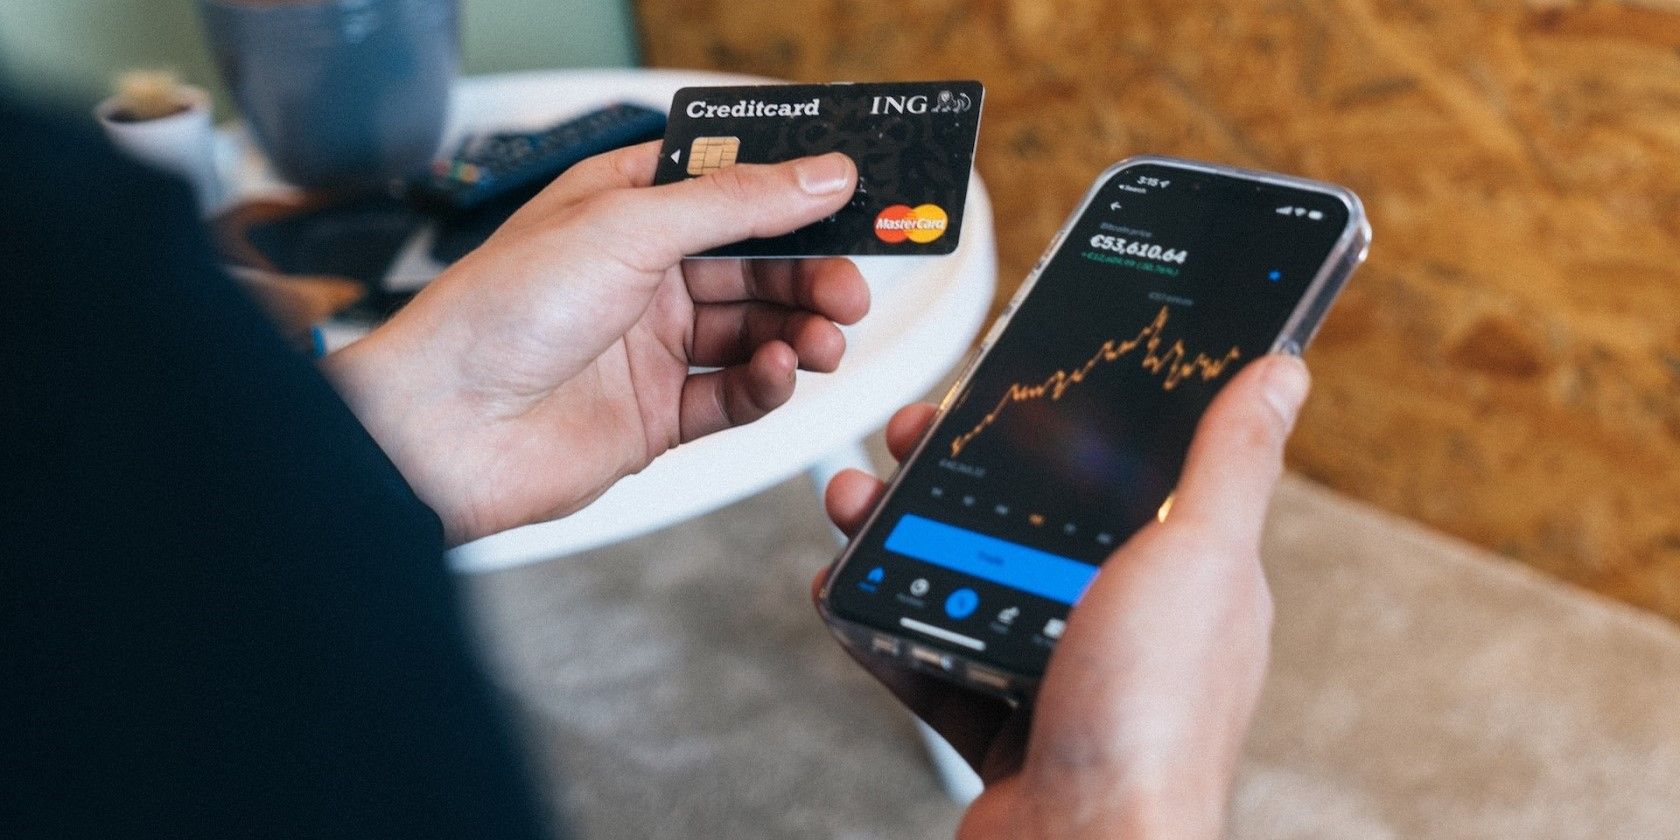 A person holding a credit card in one hand and a mobile phone showing a crypto asset in the other hand